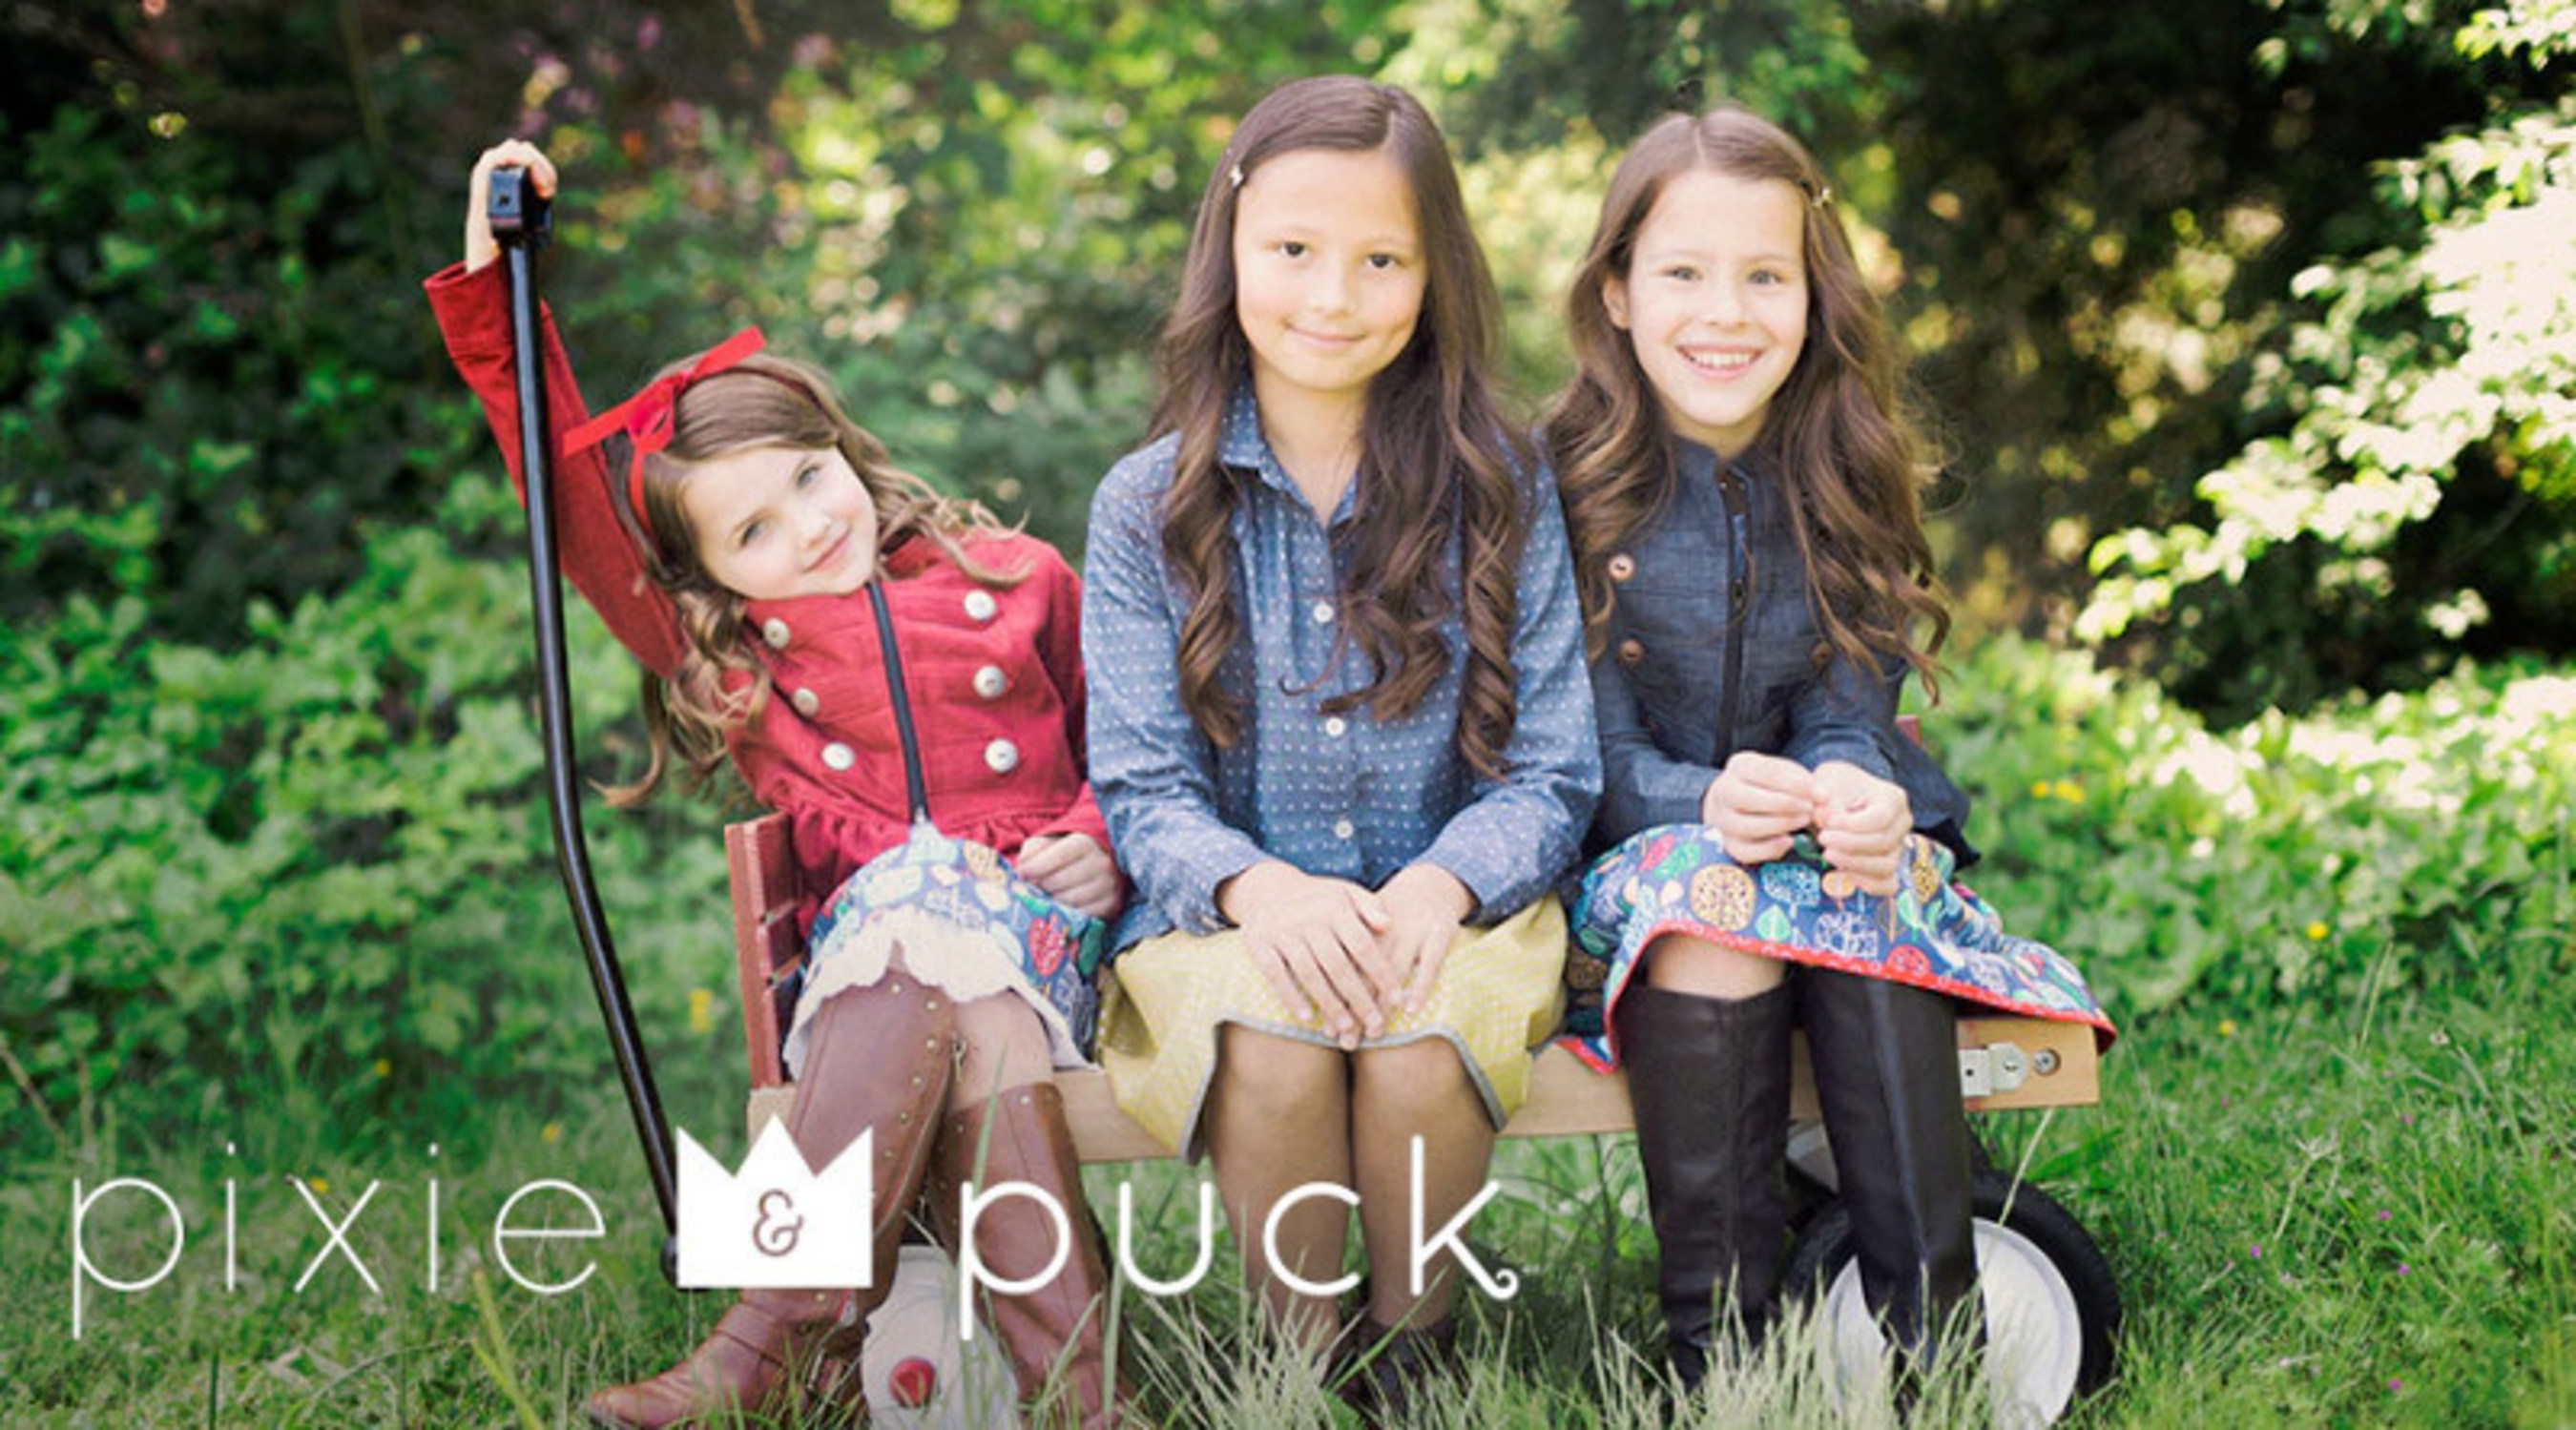 Suzanne Wiggins created Pixie & Puck to celebrate confident children everywhere through its line of timeless children's clothing.